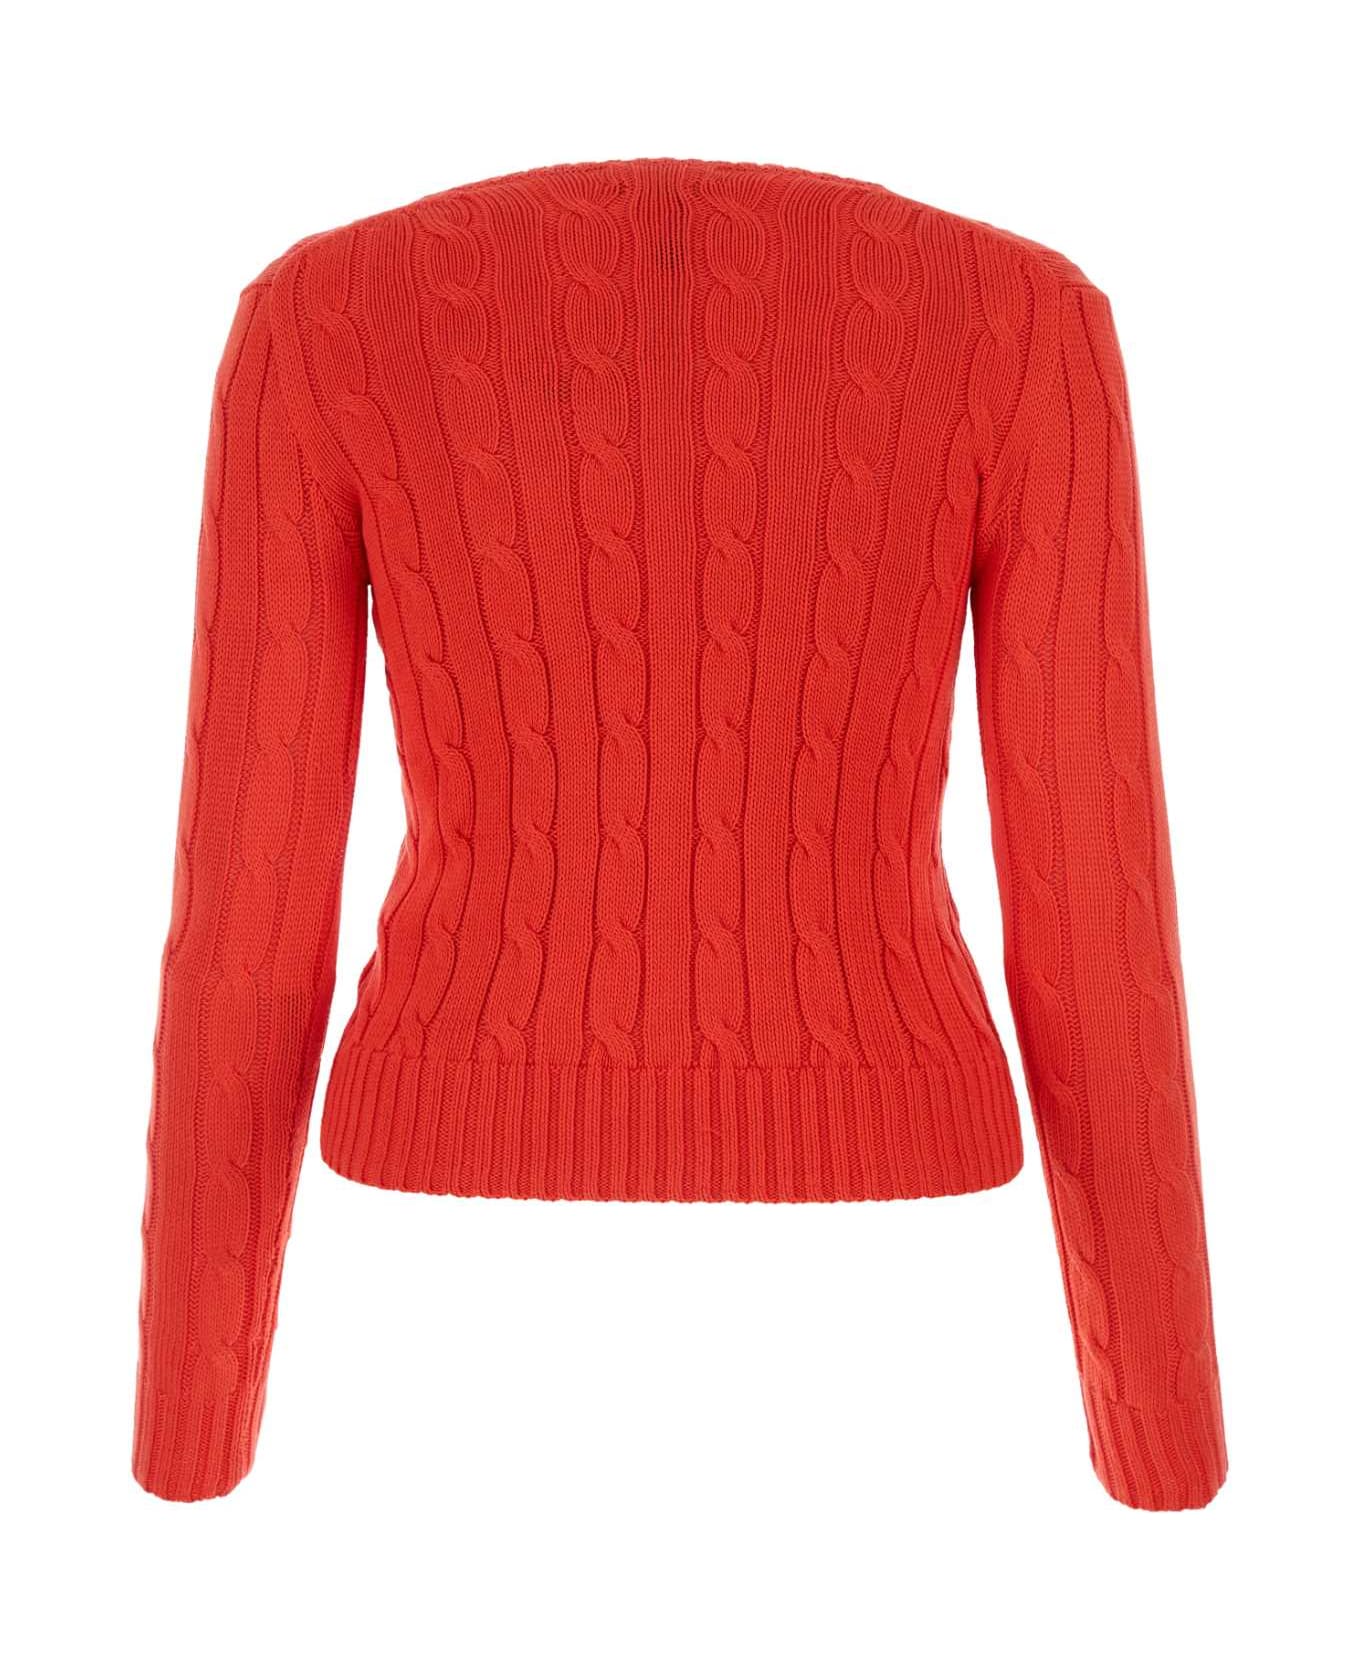 Polo Ralph Lauren Red Cotton Sweater - BRIGHTHIBISCUS